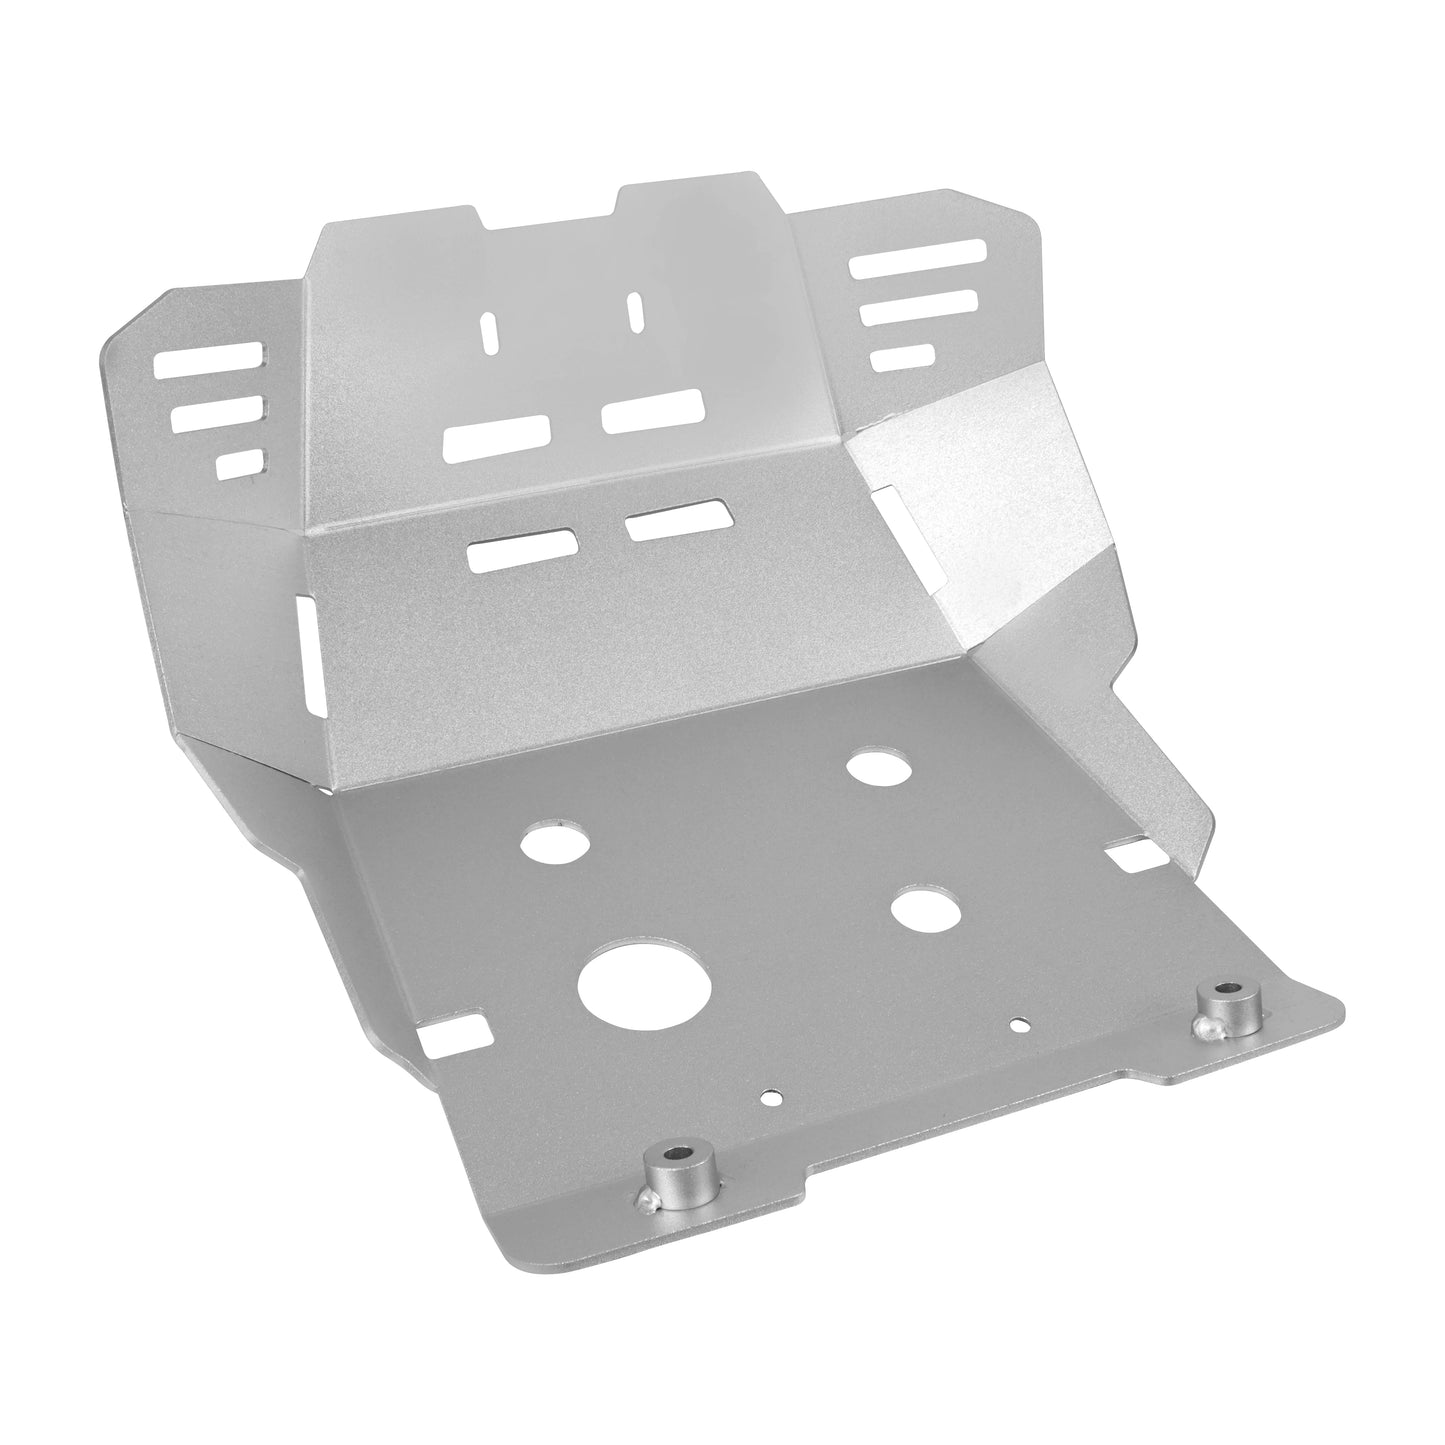 For Honda CRF300L CRF300 L CRF 300 L CRF250L 2020-2023 Motorcycle Under Engine Base Chassis Cover Skid Plate Belly Pan Protector